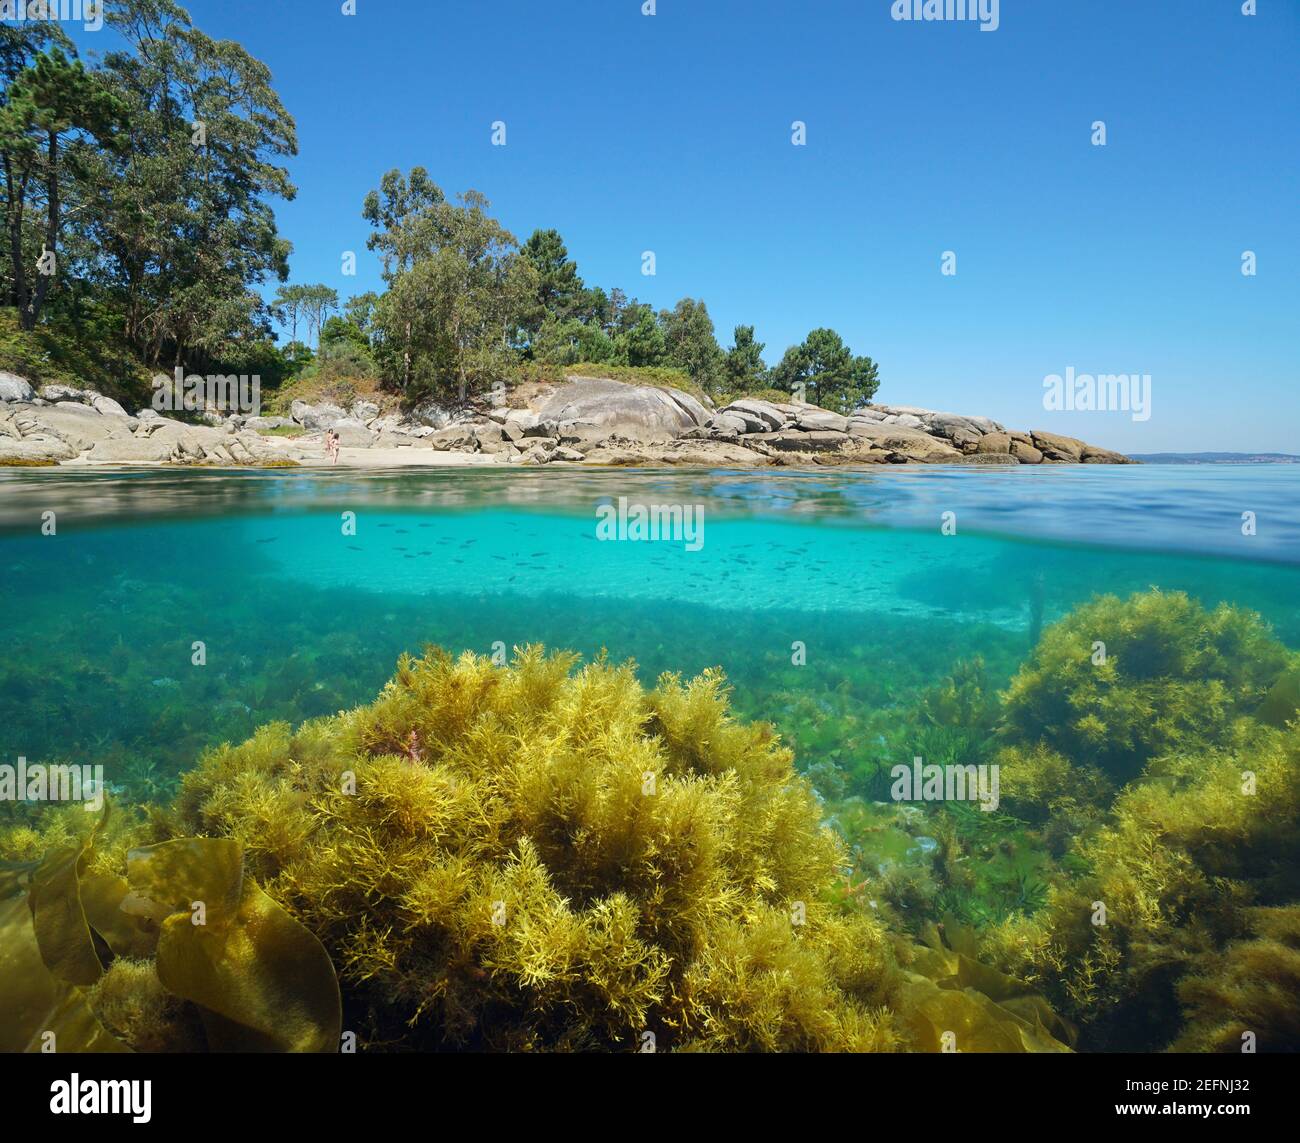 Atlantic coast of Galicia in Spain with algae in the ocean, split view over and under water surface, Bueu, Pontevedra province Stock Photo